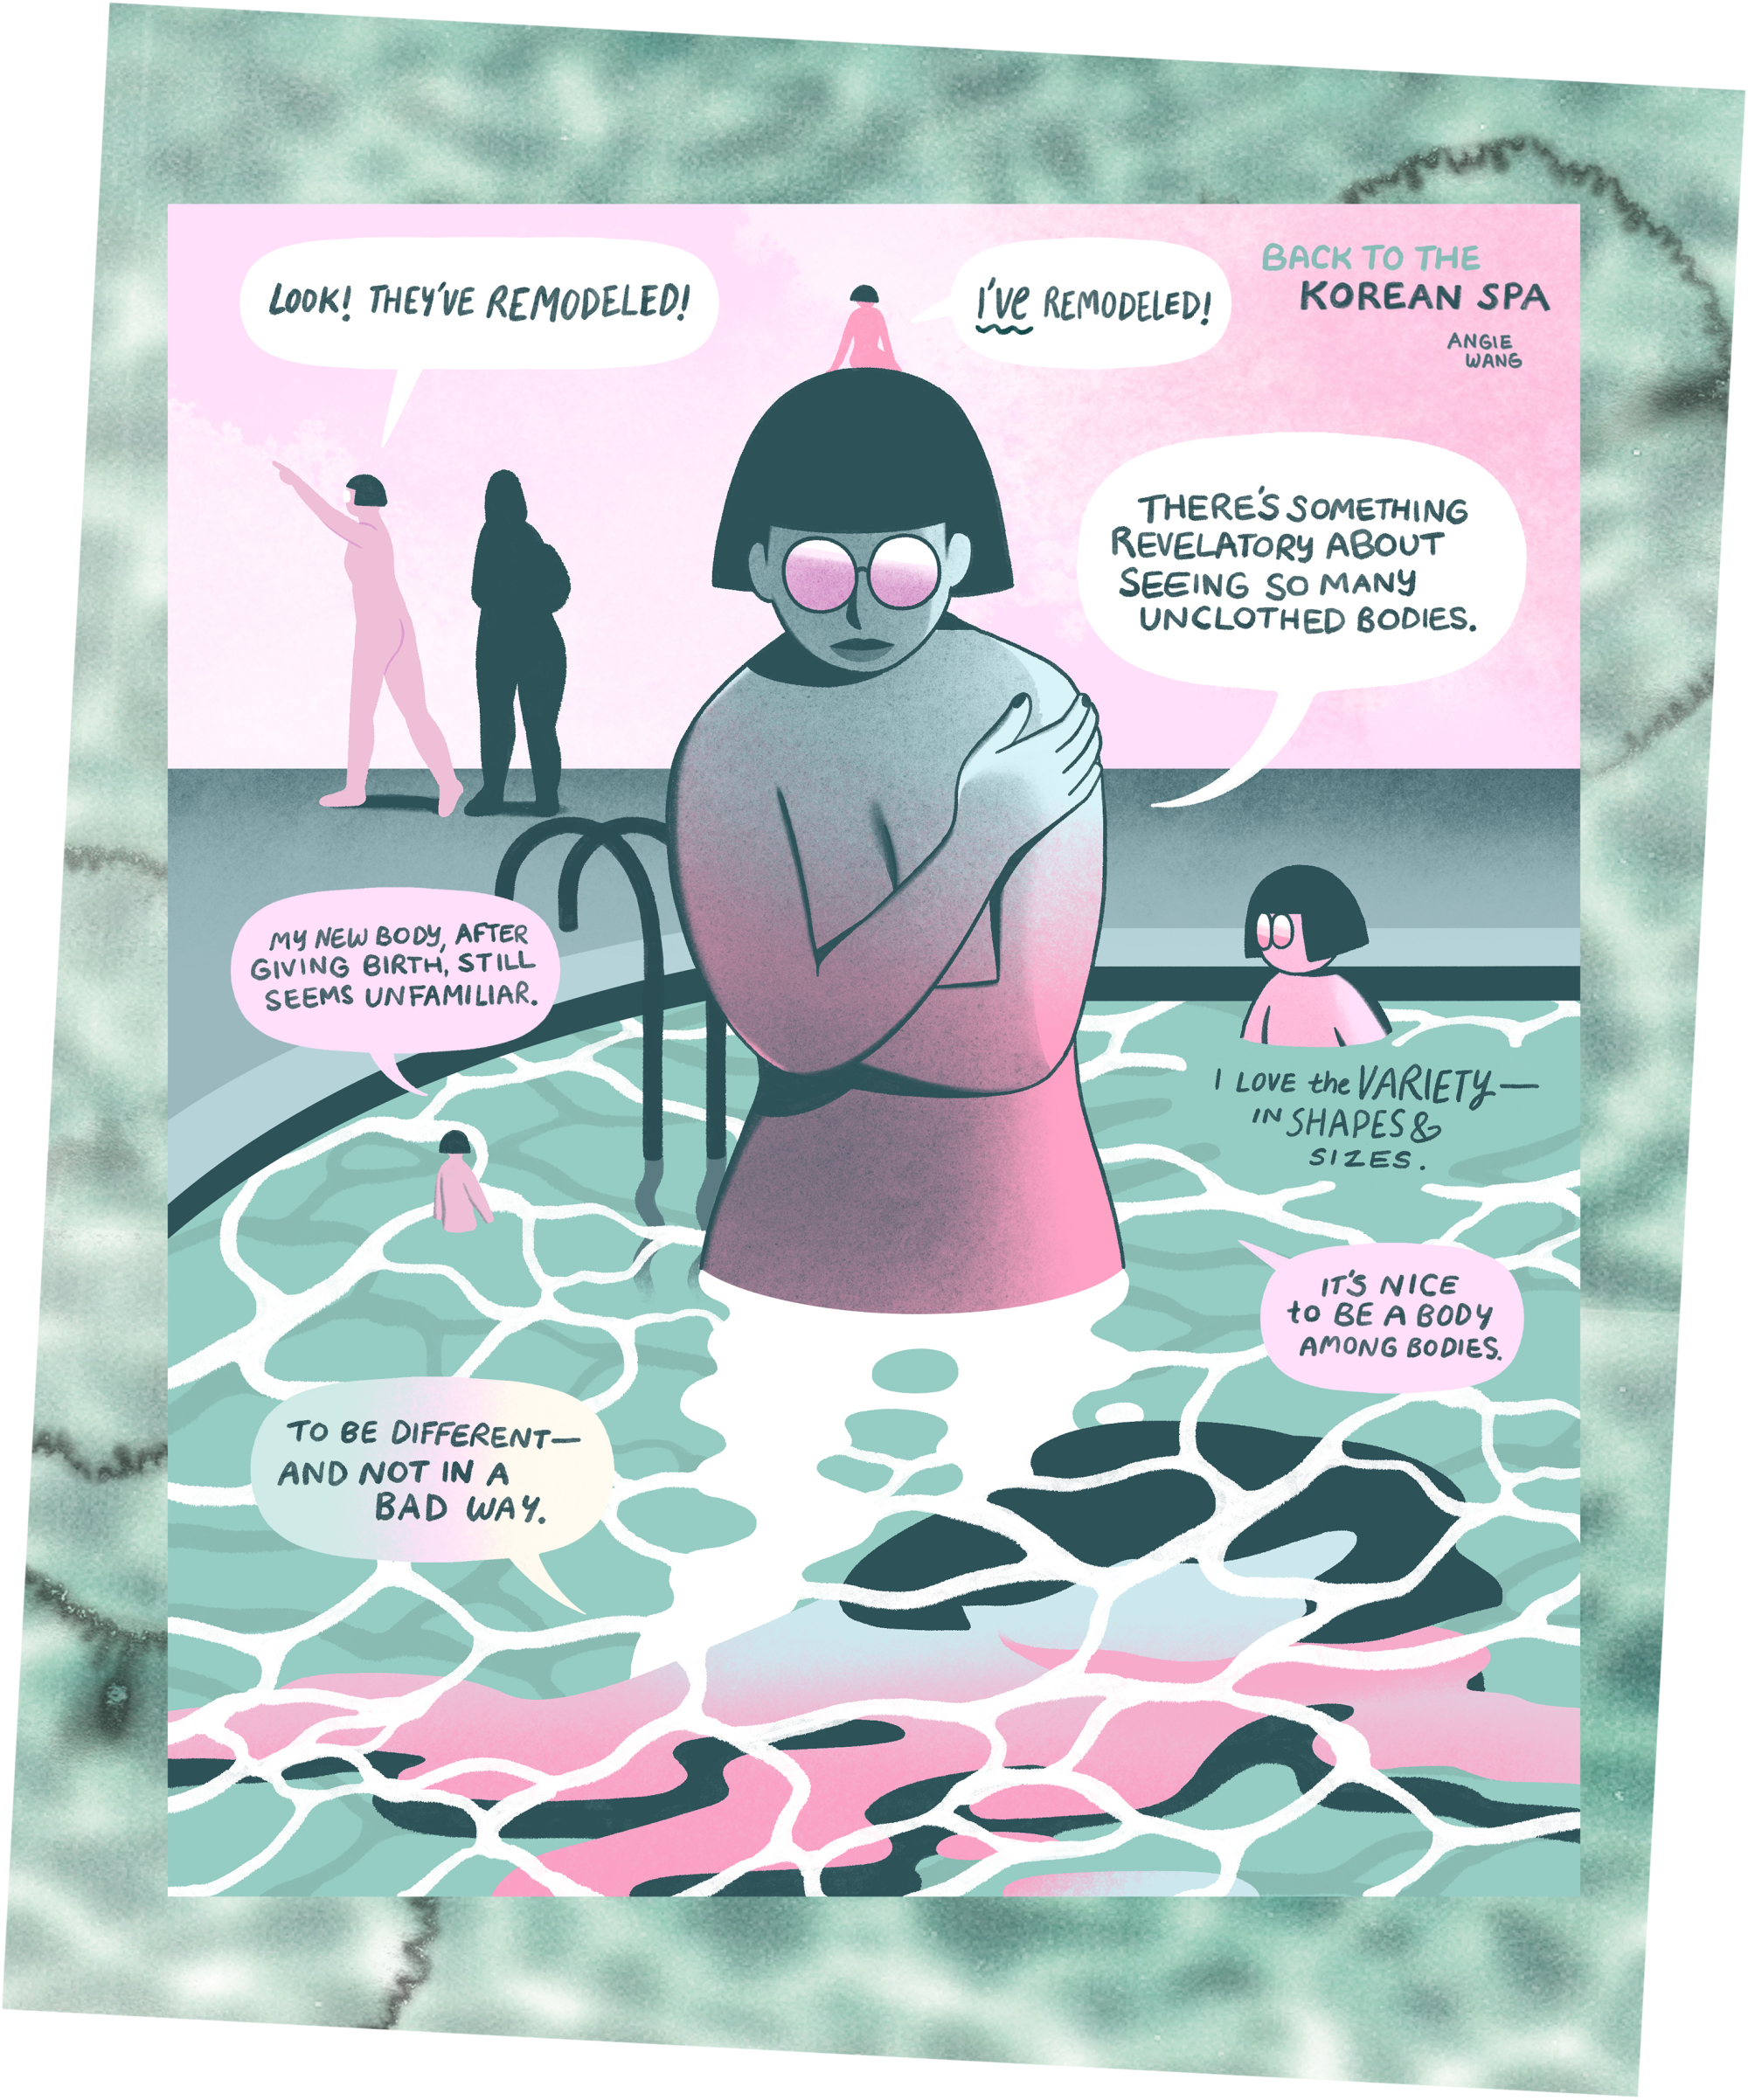 comic of a woman embracing herself in the middle of a Korean spa pool with different vignettes and thought bubbles around her